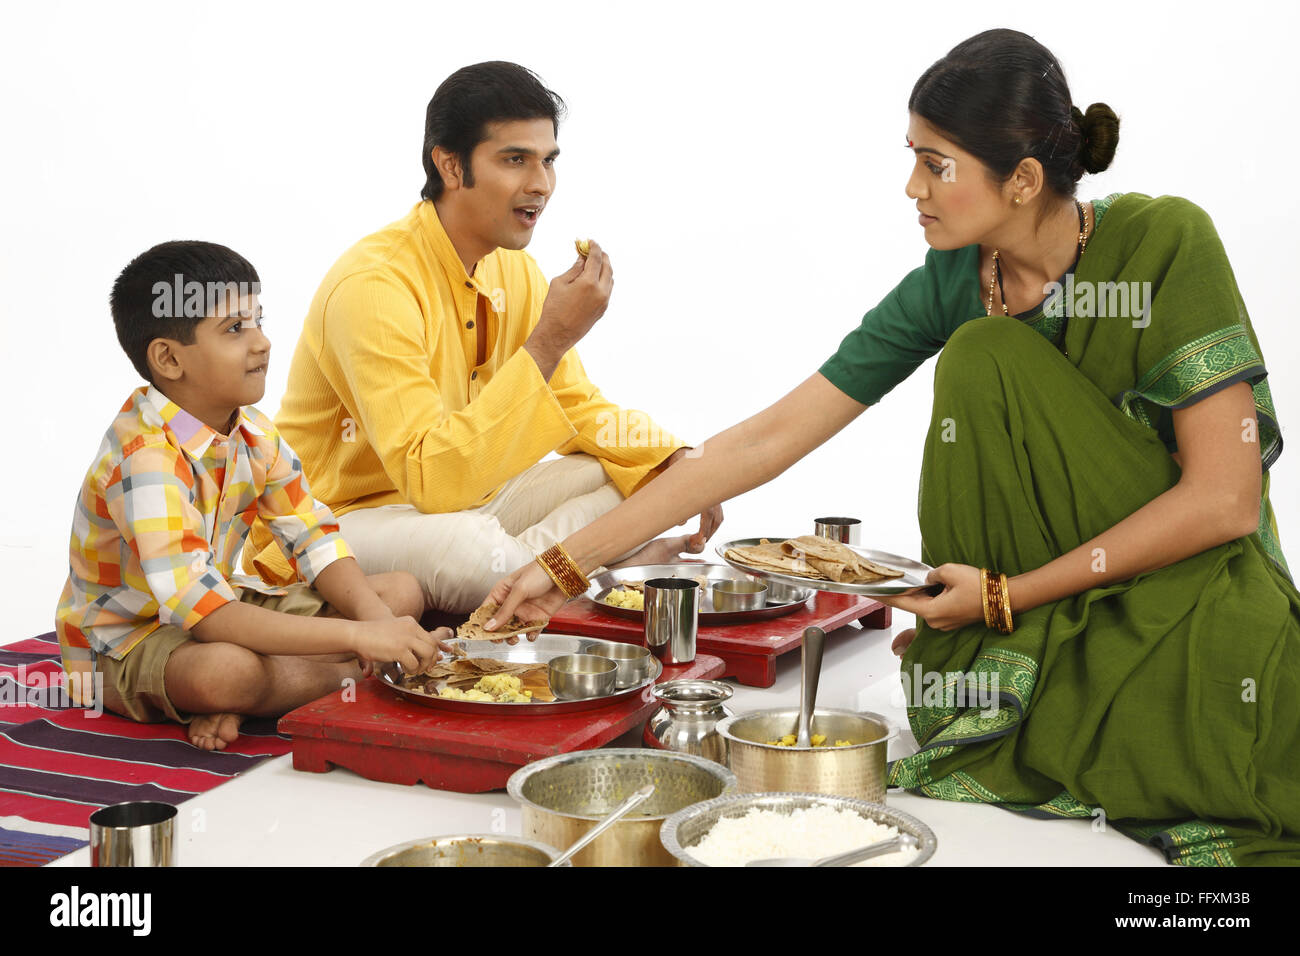 Father eating food and mother serving roti to son MR#743A,743B,743C,743D Stock Photo